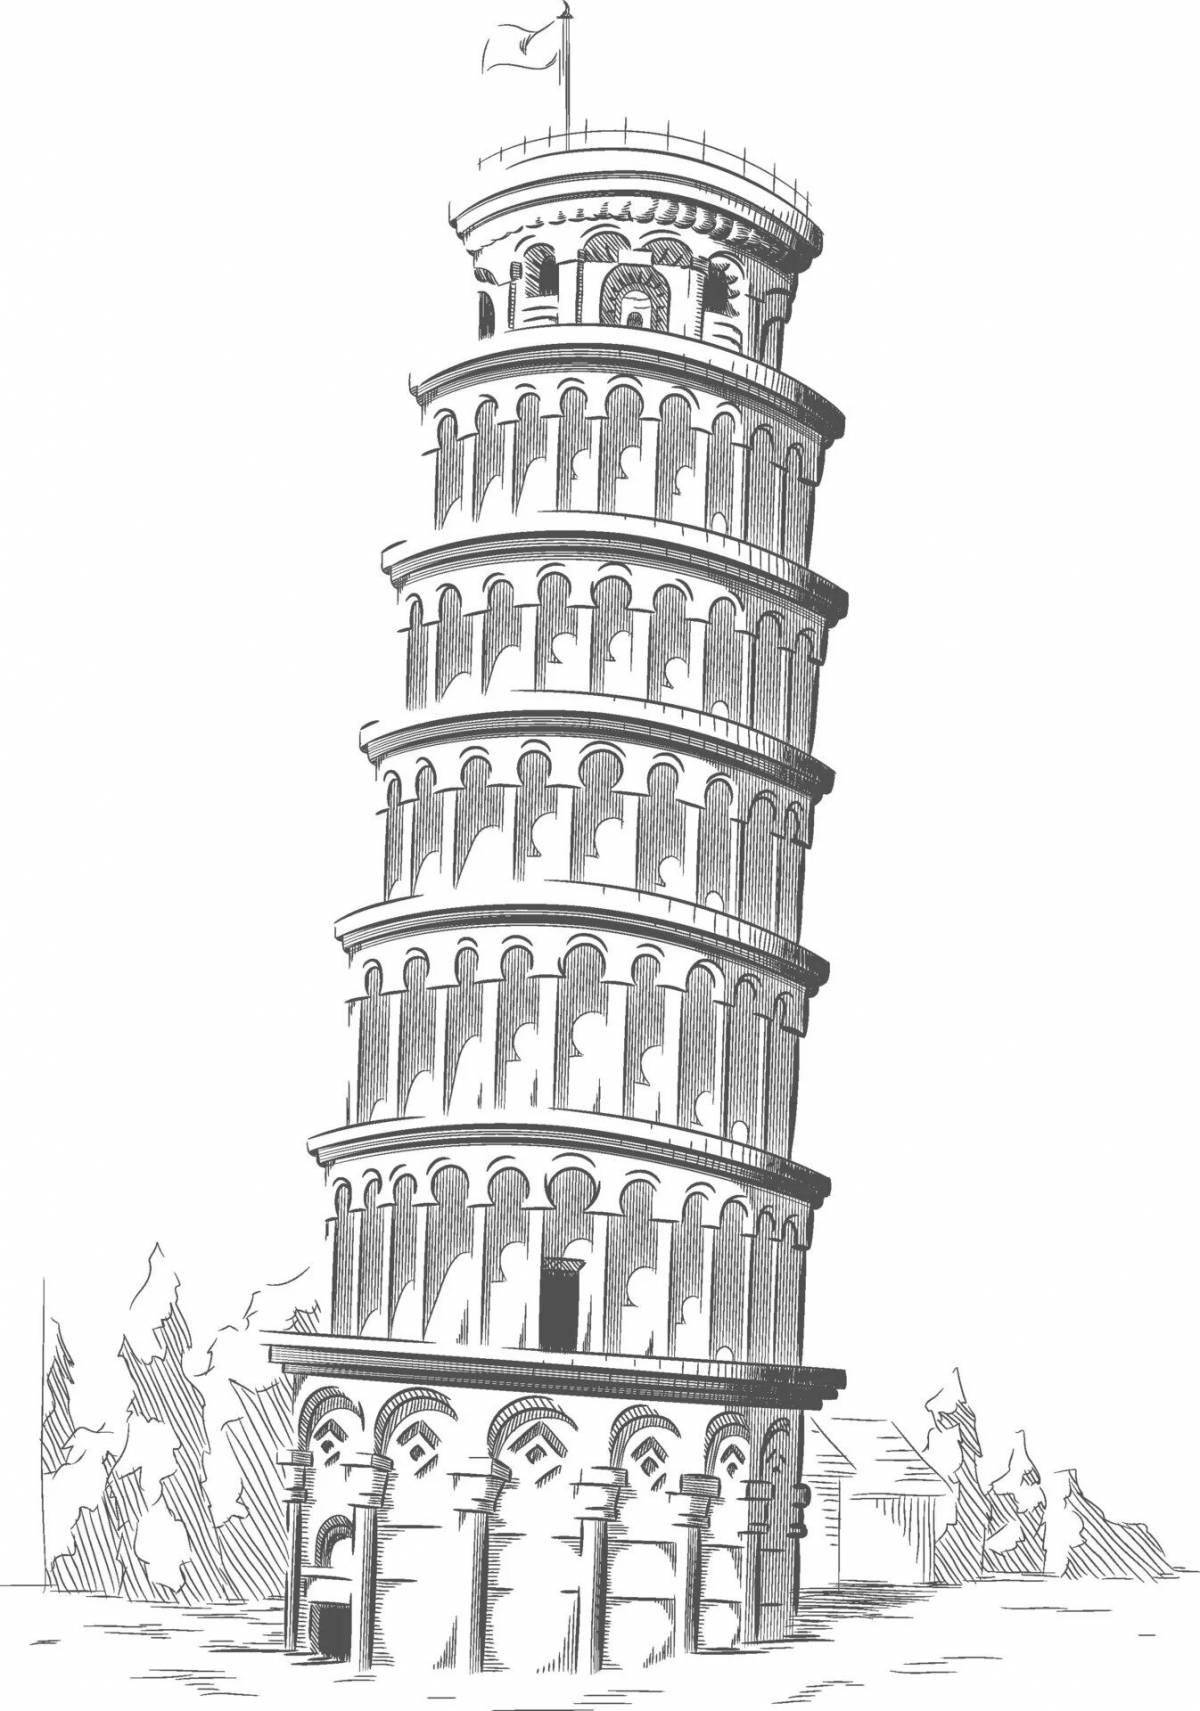 Major coloring of the Leaning Tower of Pisa